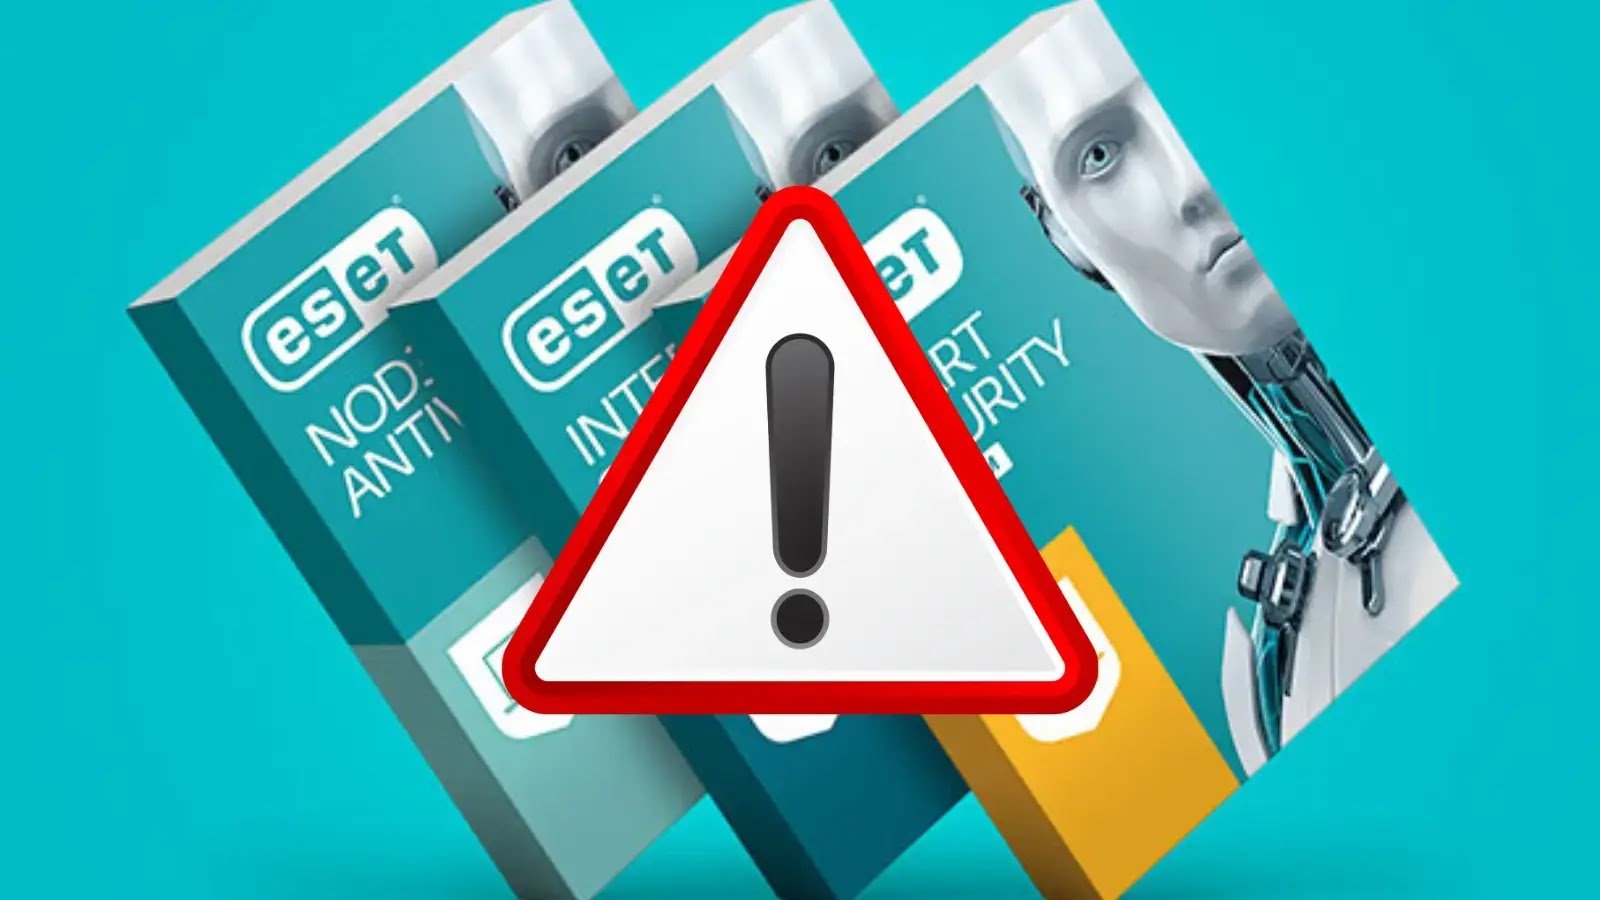 ESET Security Products for Windows Vulnerable to privilege escalation